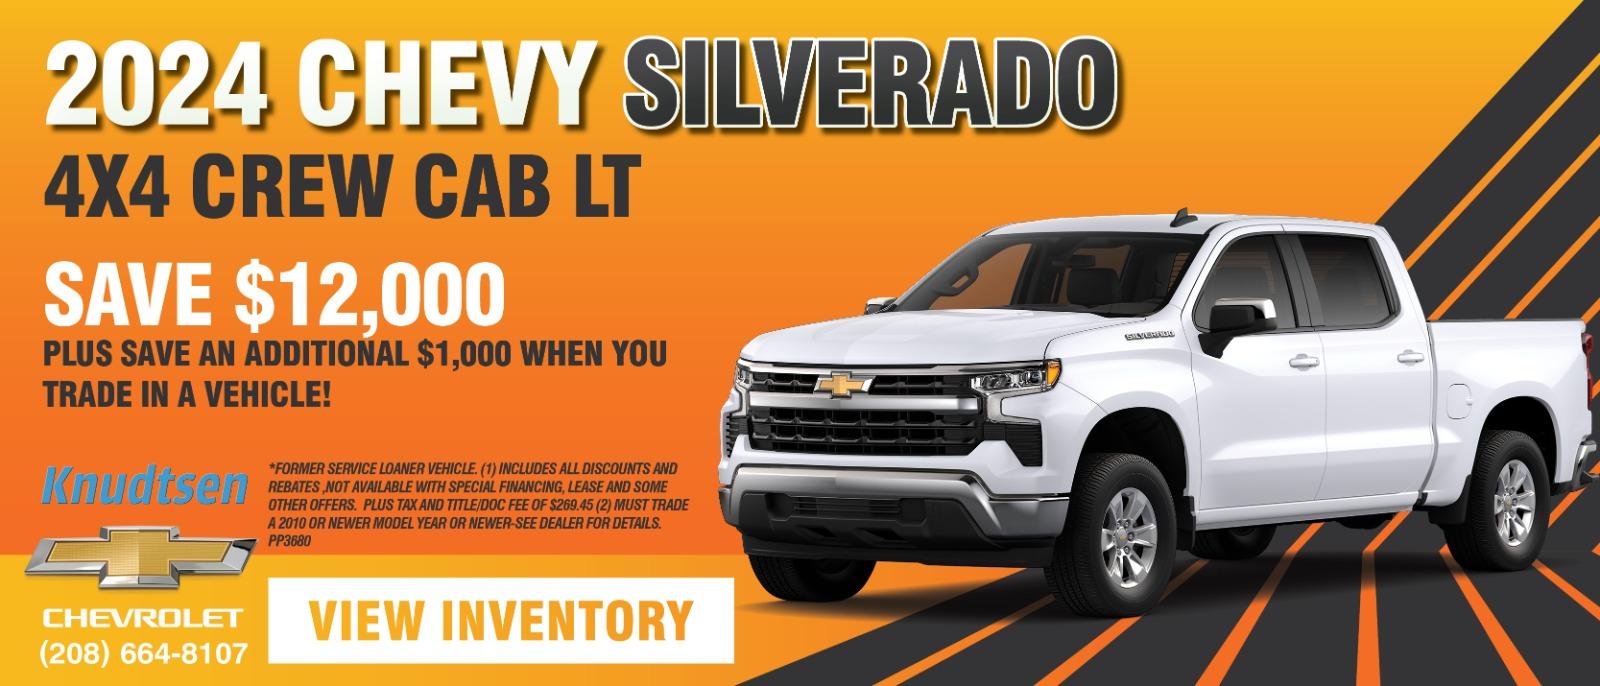 2024 CHEVY SILVERADO 4X4 CREW CAB LT 
SAVE $12,000 PLUS SAVE AN ADDITIONAL $1,000 WHEN YOU TRADE IN A VEHICLE!